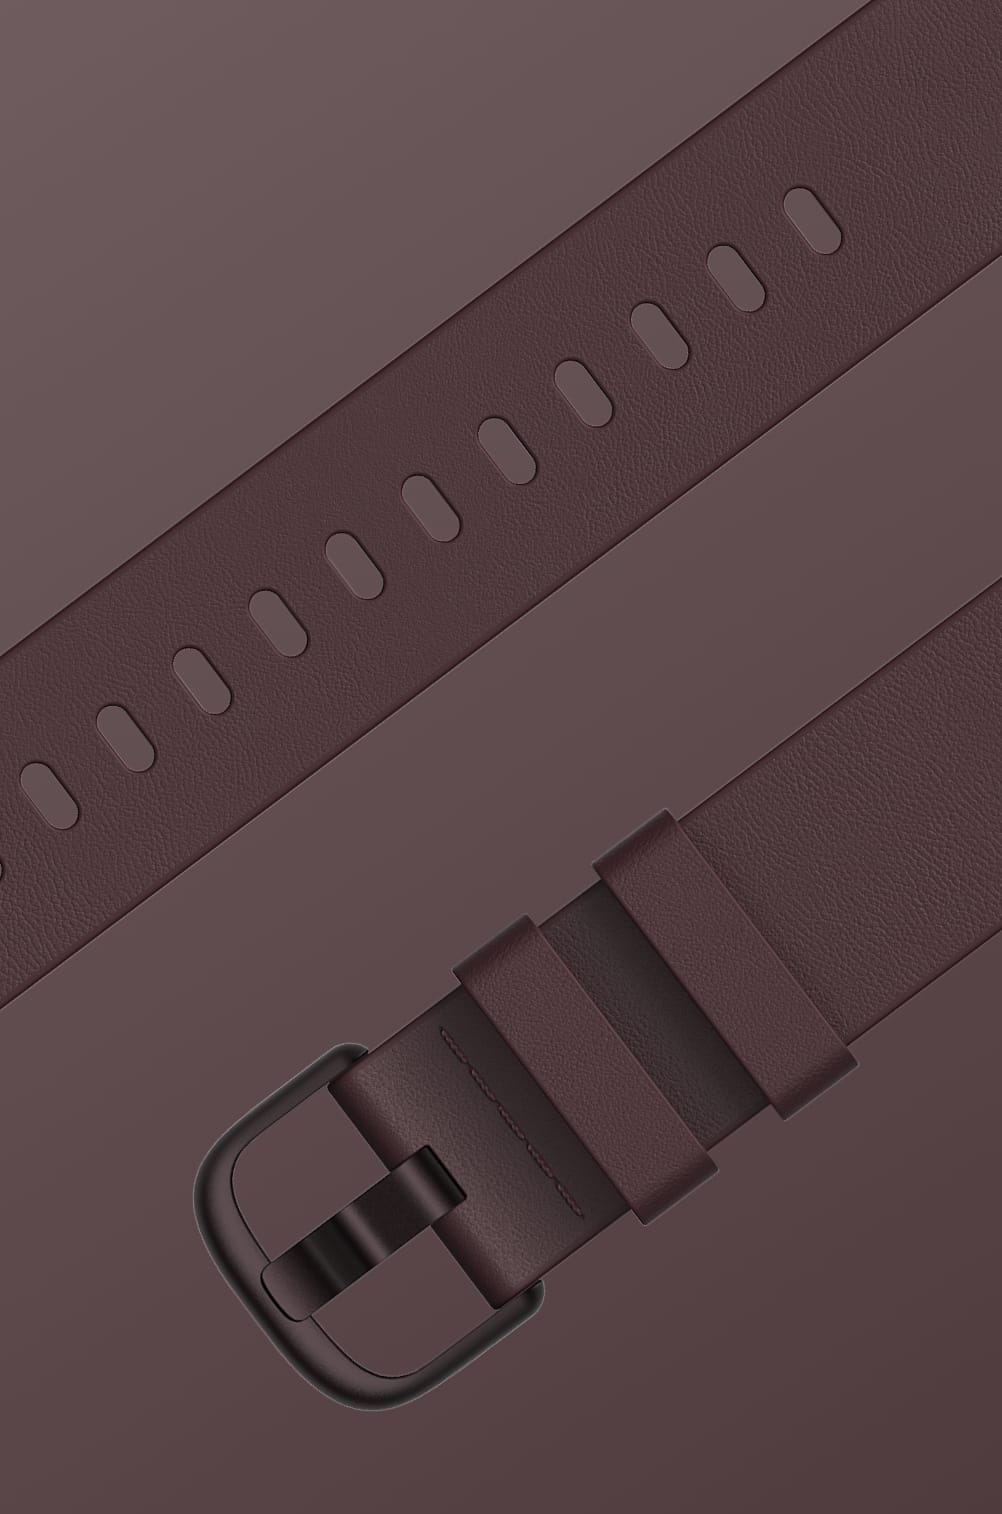 Fitbit Charge 6 / 5 / 4 / 3 Band Aurel Made From Leather and